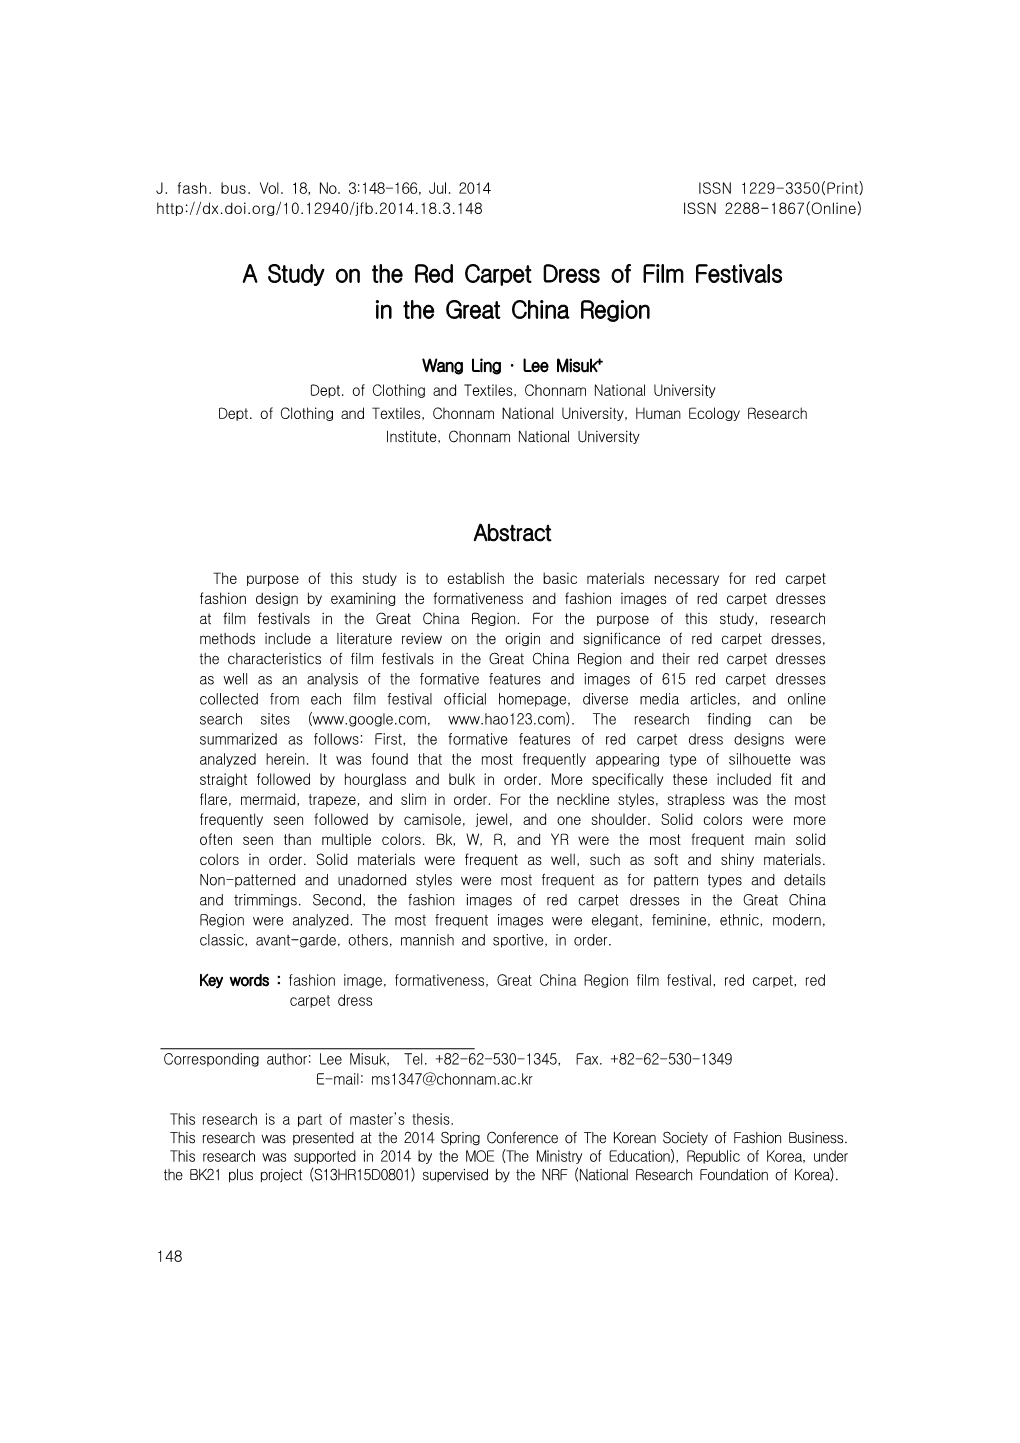 A Study on the Red Carpet Dress of Film Festivals in the Great China Region